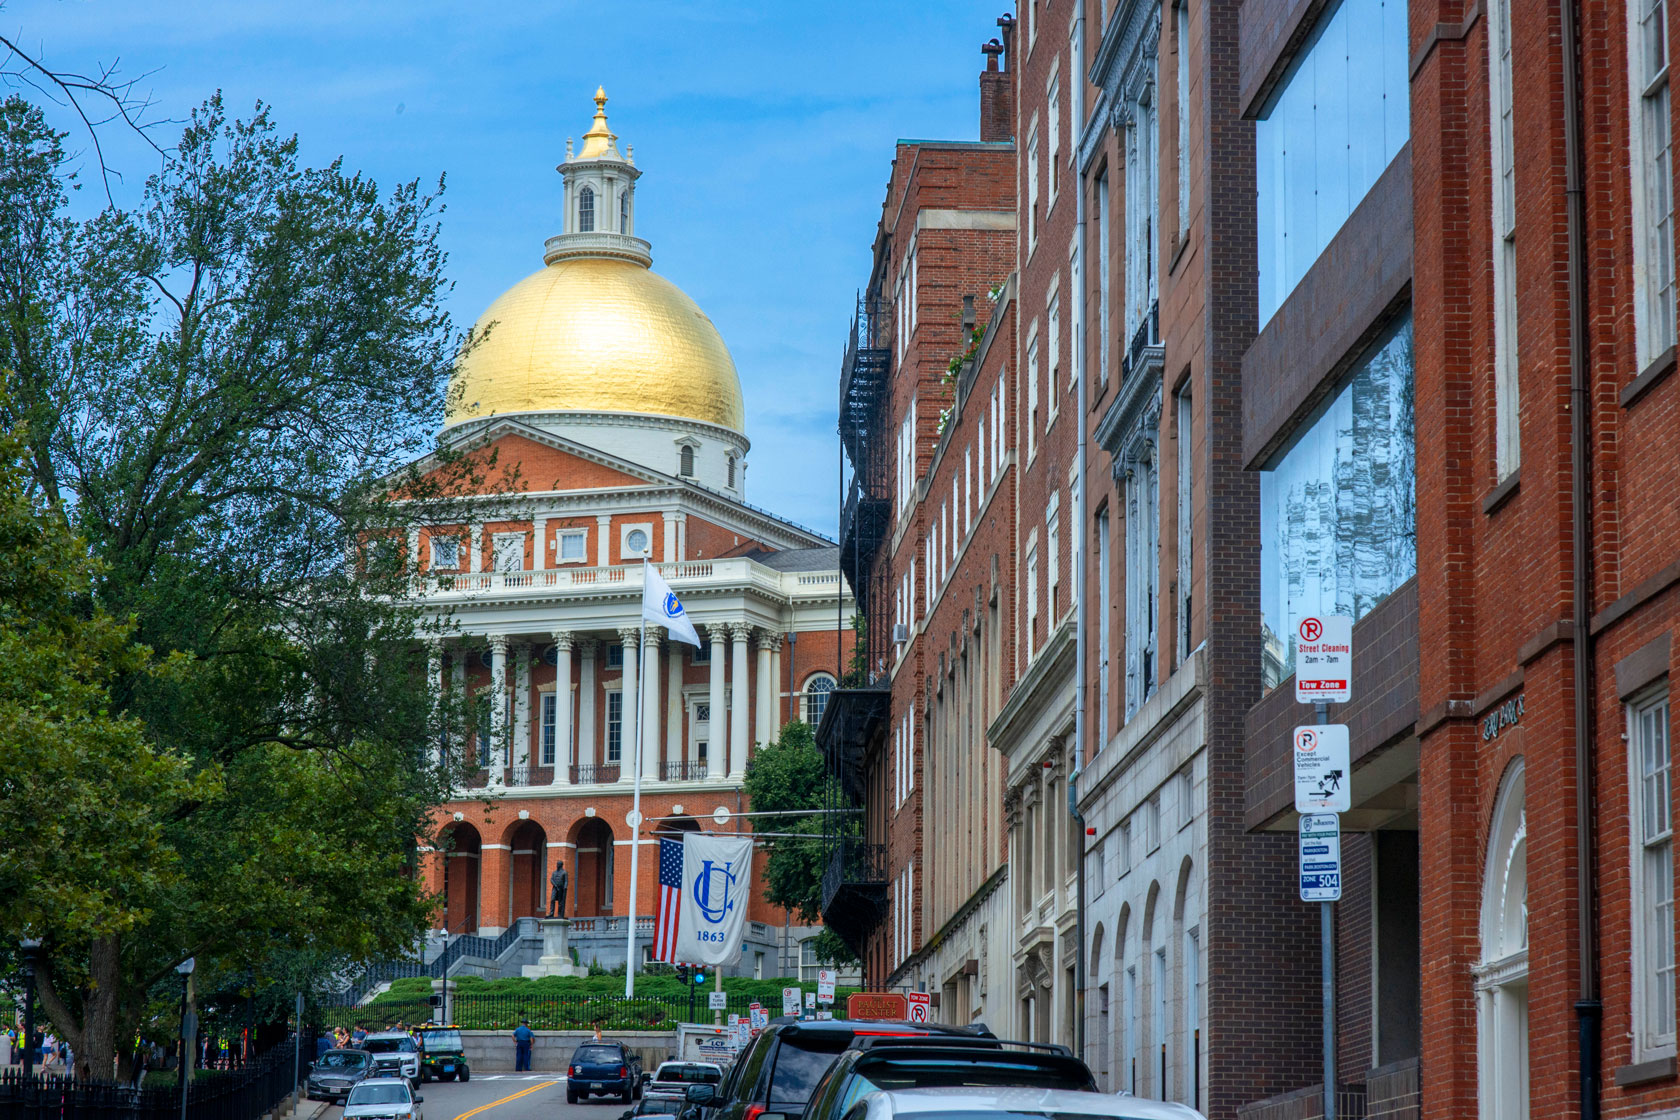 The golden dome of the Massachusetts State House is seen behind a street beneath a blue sky.